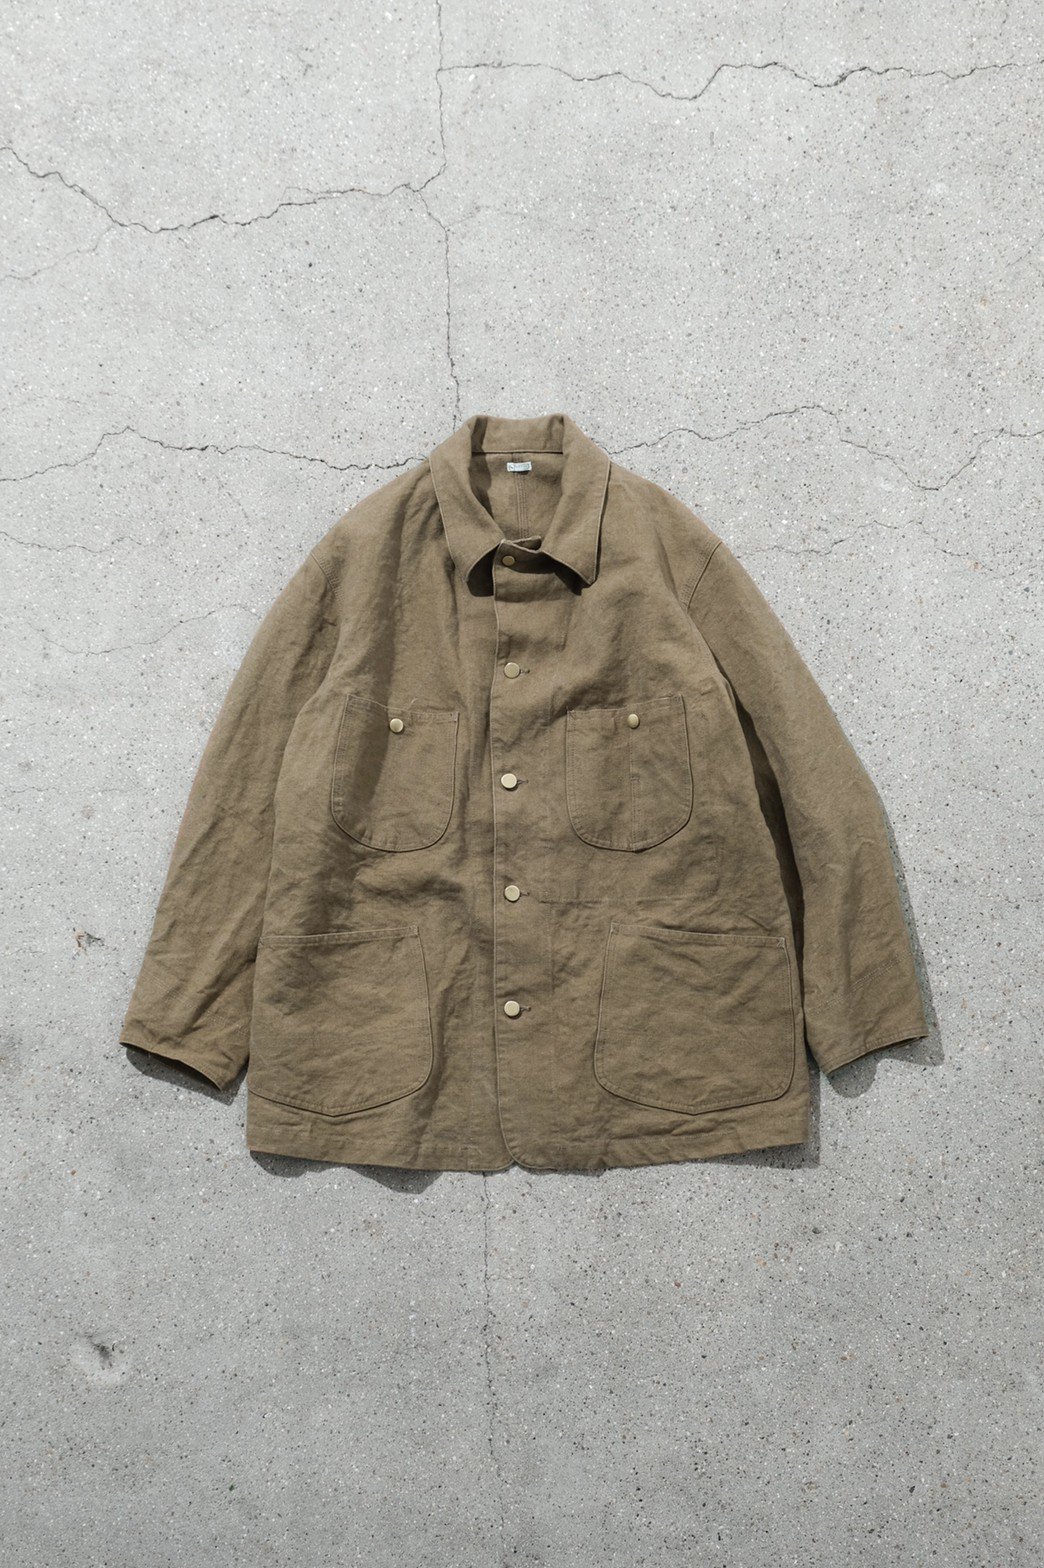 A.PRESSE / Coverall Jacket